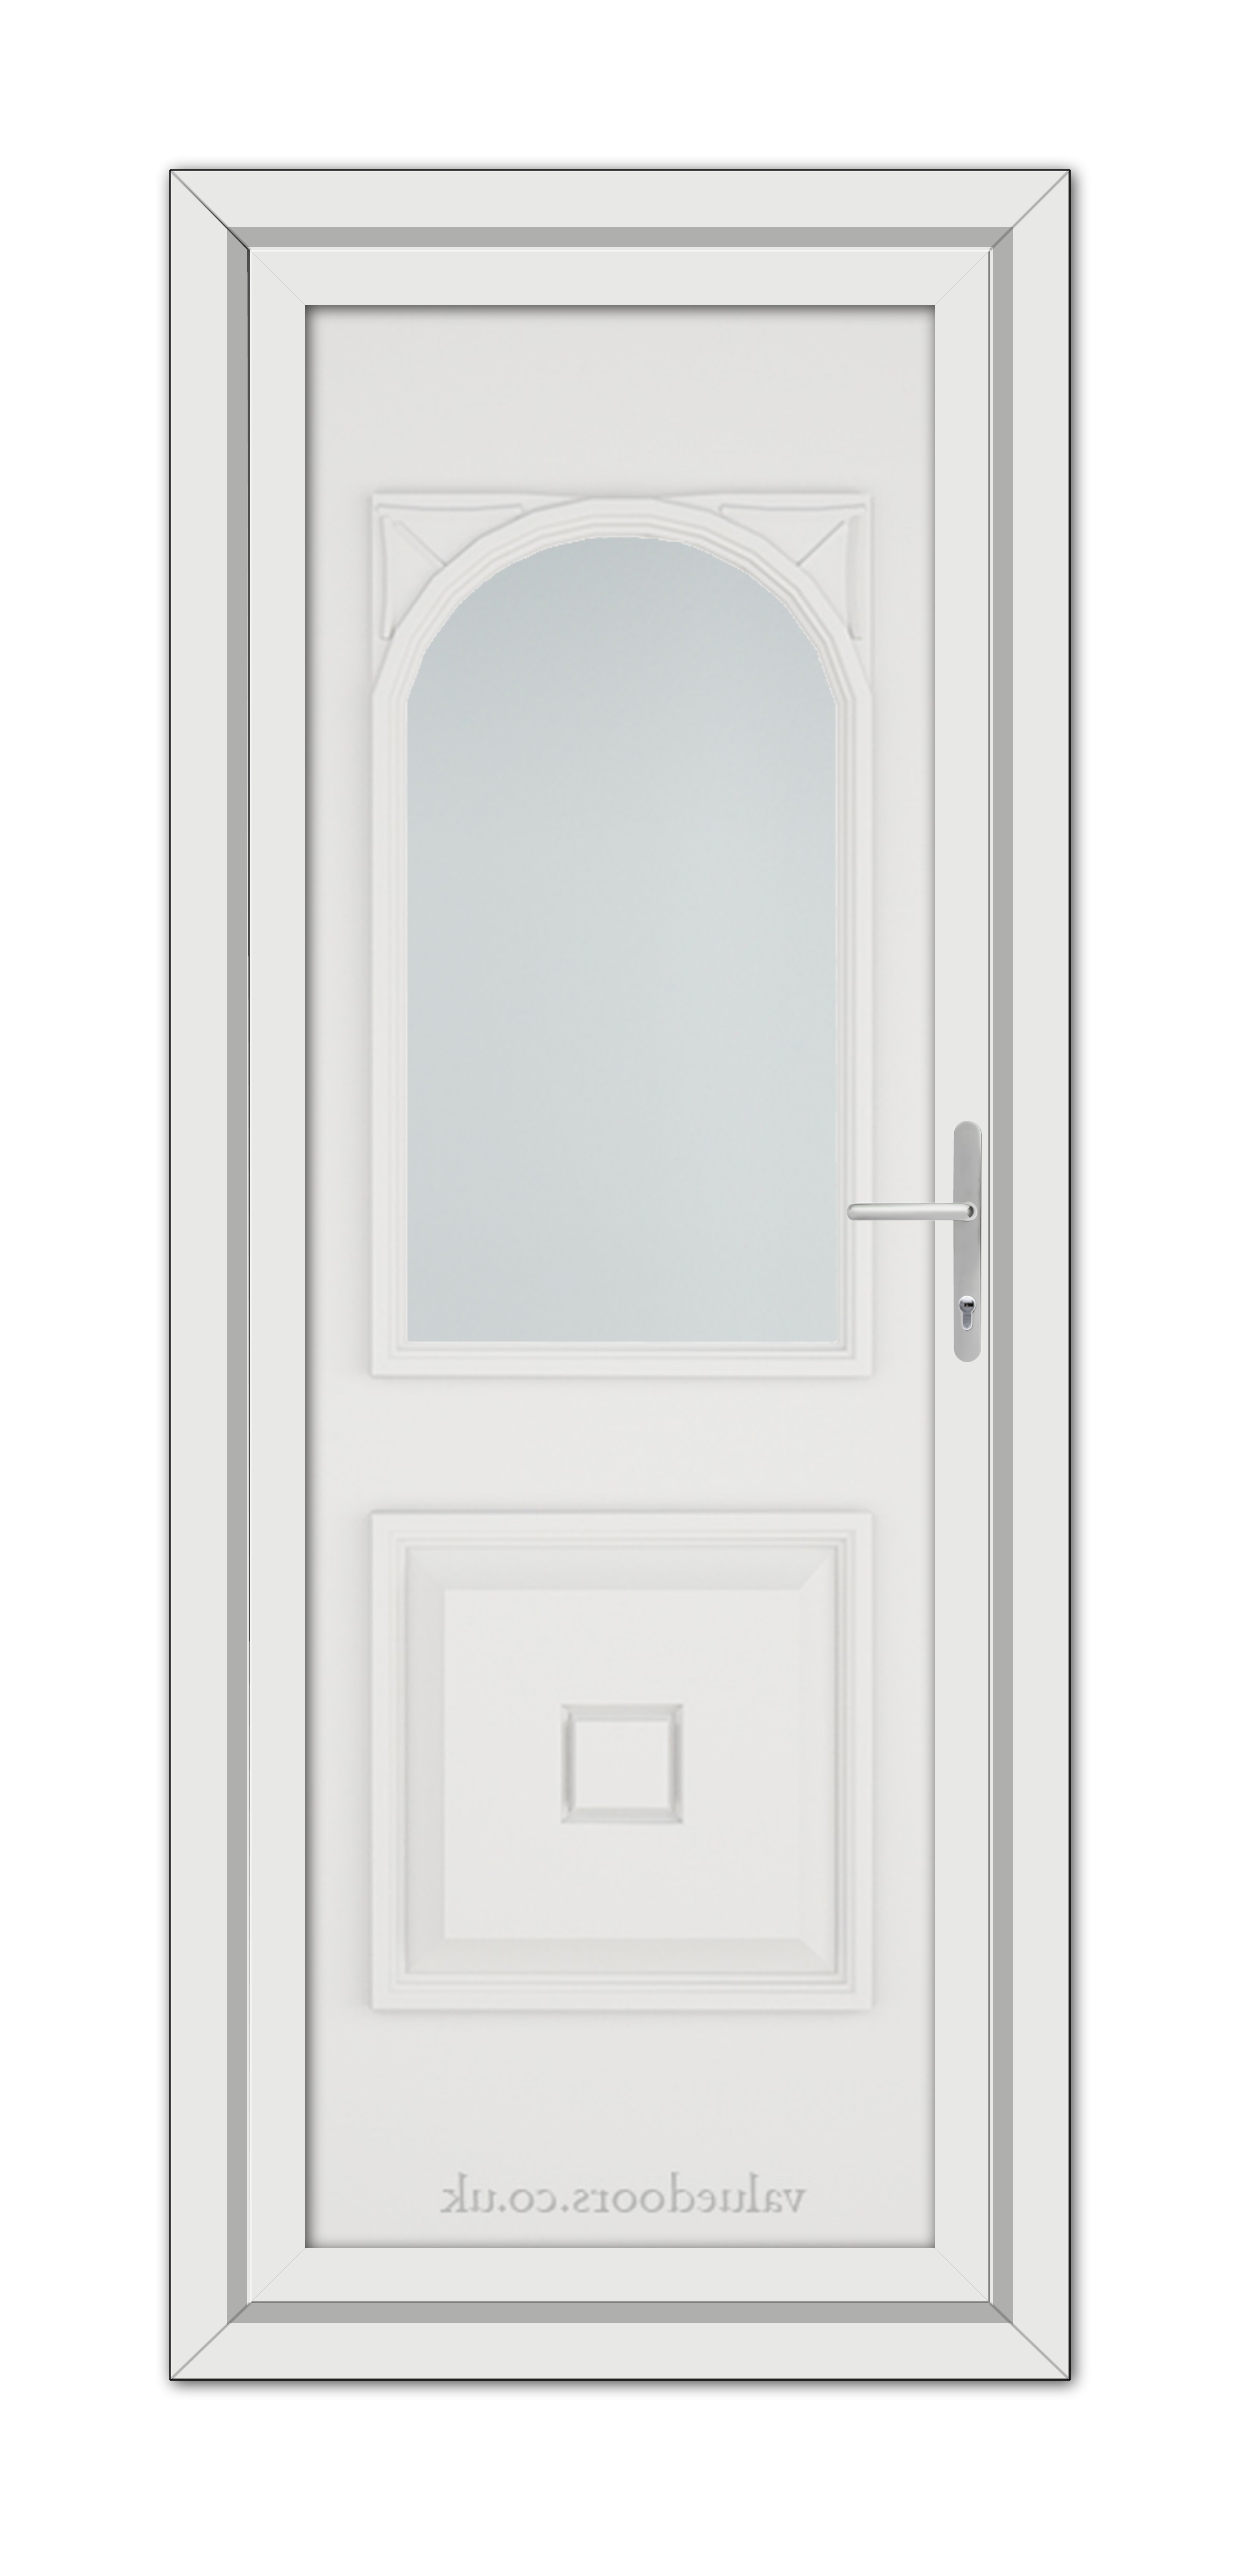 White Reims uPVC Door featuring an arched window at the top and a rectangular panel at the bottom, with a silver handle on the right side.